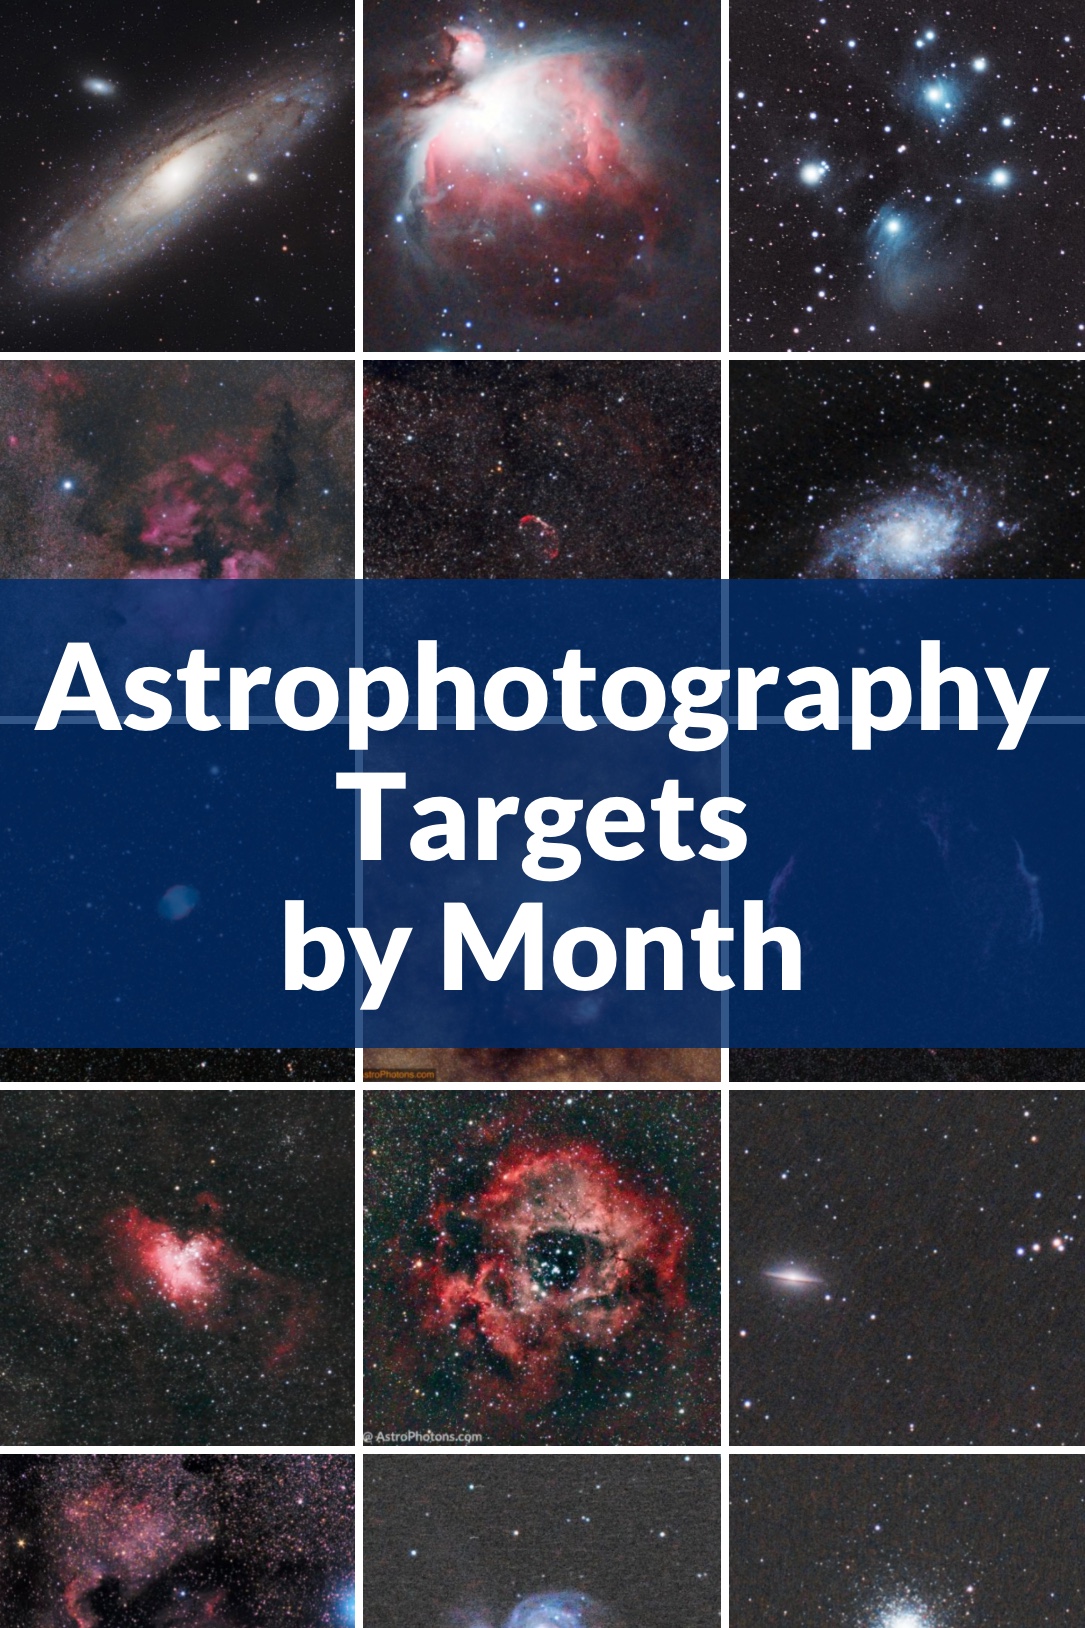 Astrophotography targets by month - list & calendar